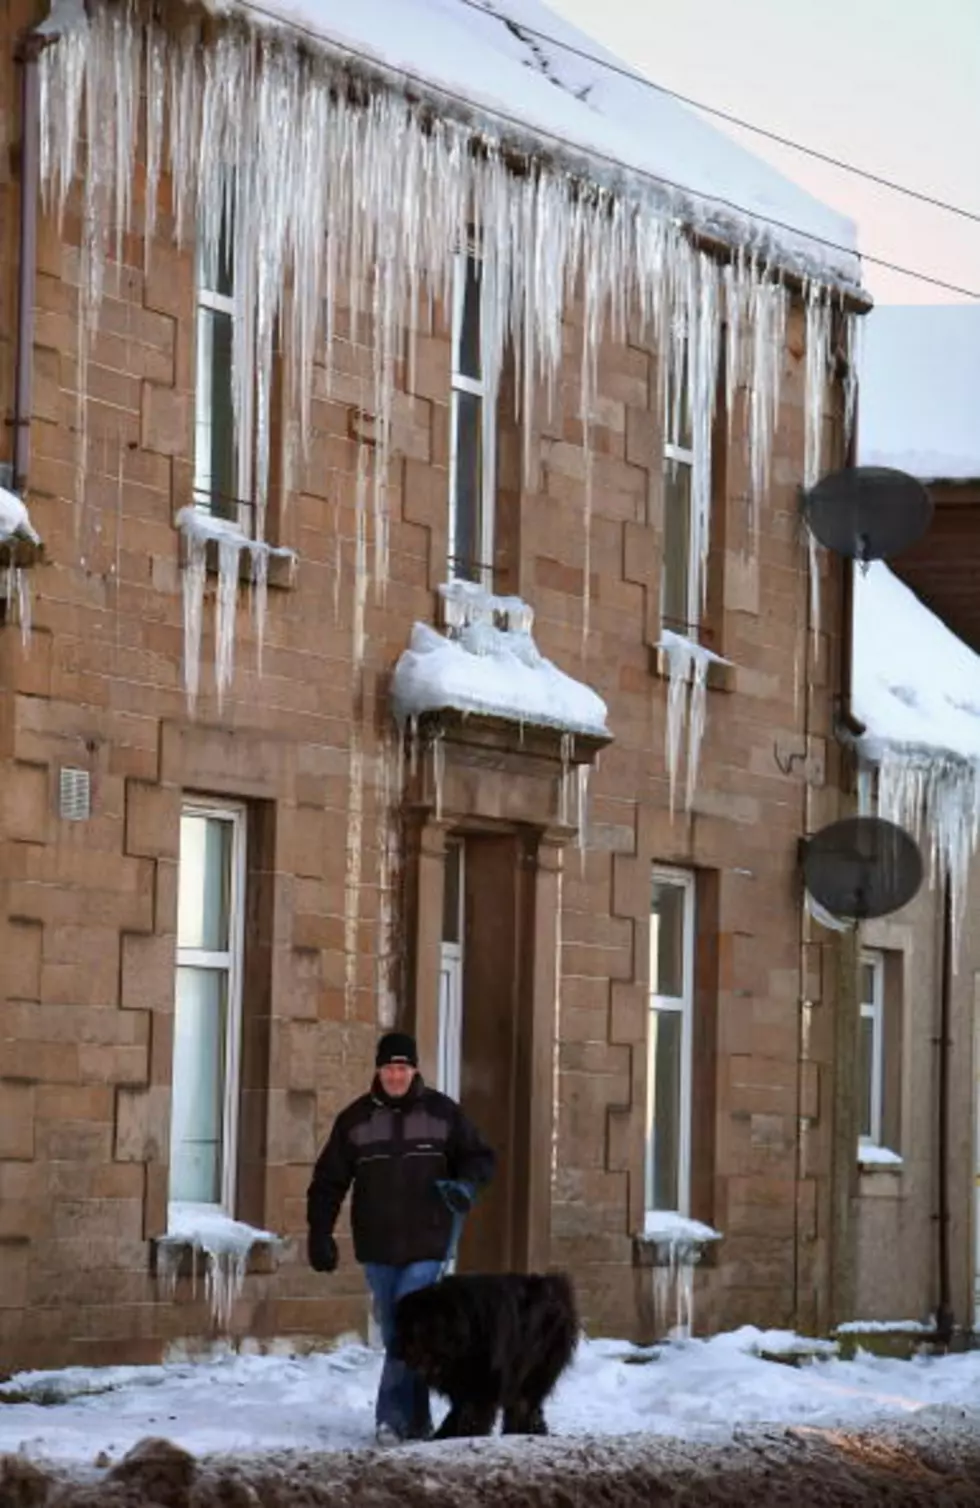 People Killed By Falling Icicles!